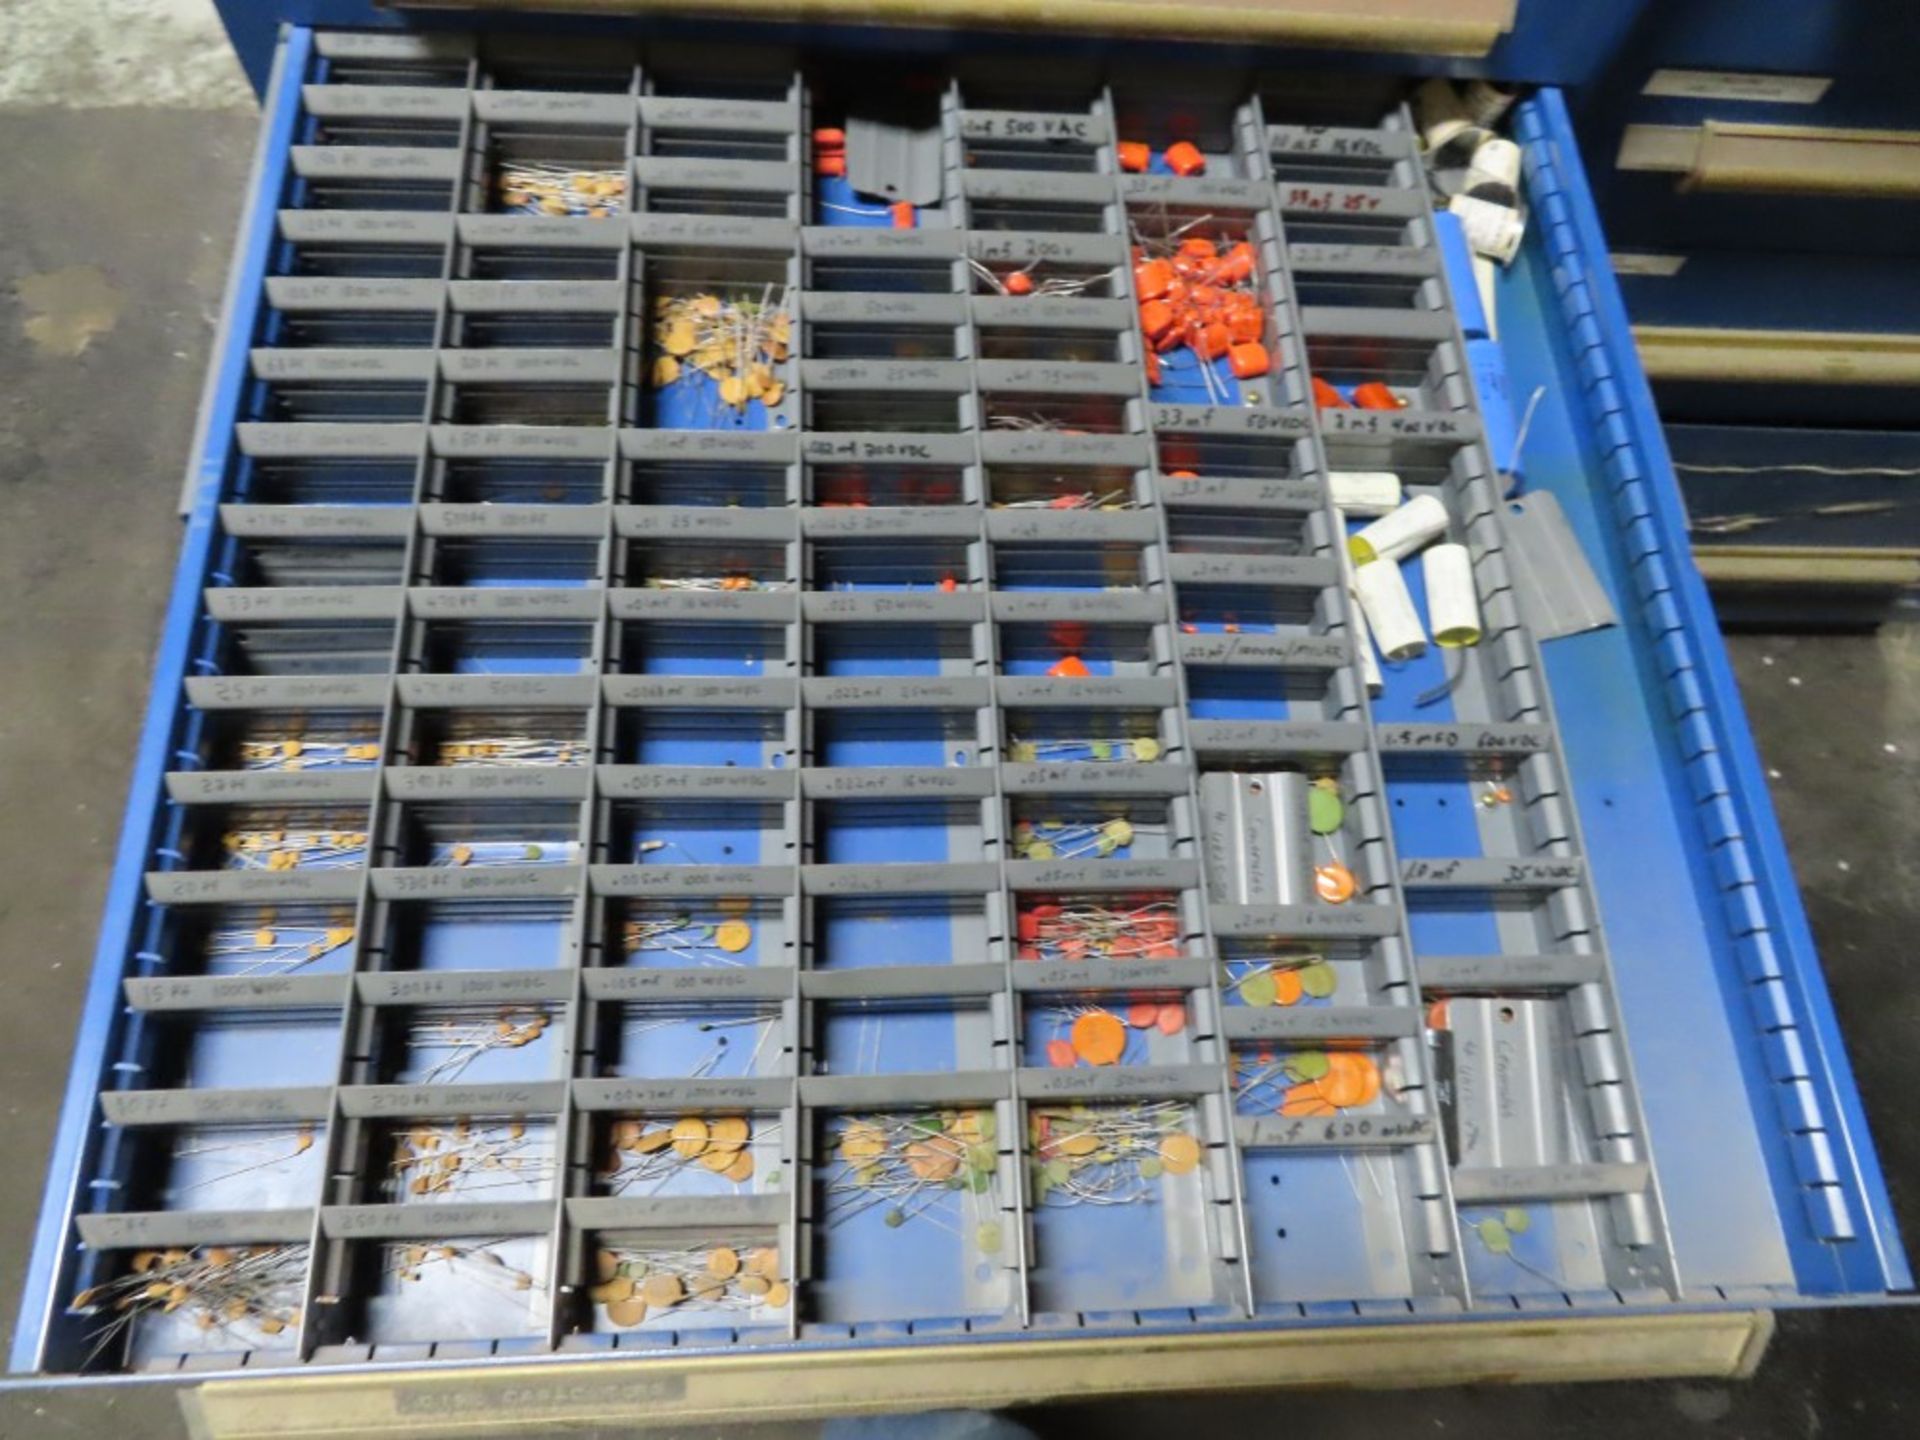 EQUIPTO 16-DRAWER CABINET, W/ CEPROM CHIPS, CAPACITORS, RESISTORS, DIODES, ELECTRICAL COMPONENTS - Image 3 of 4